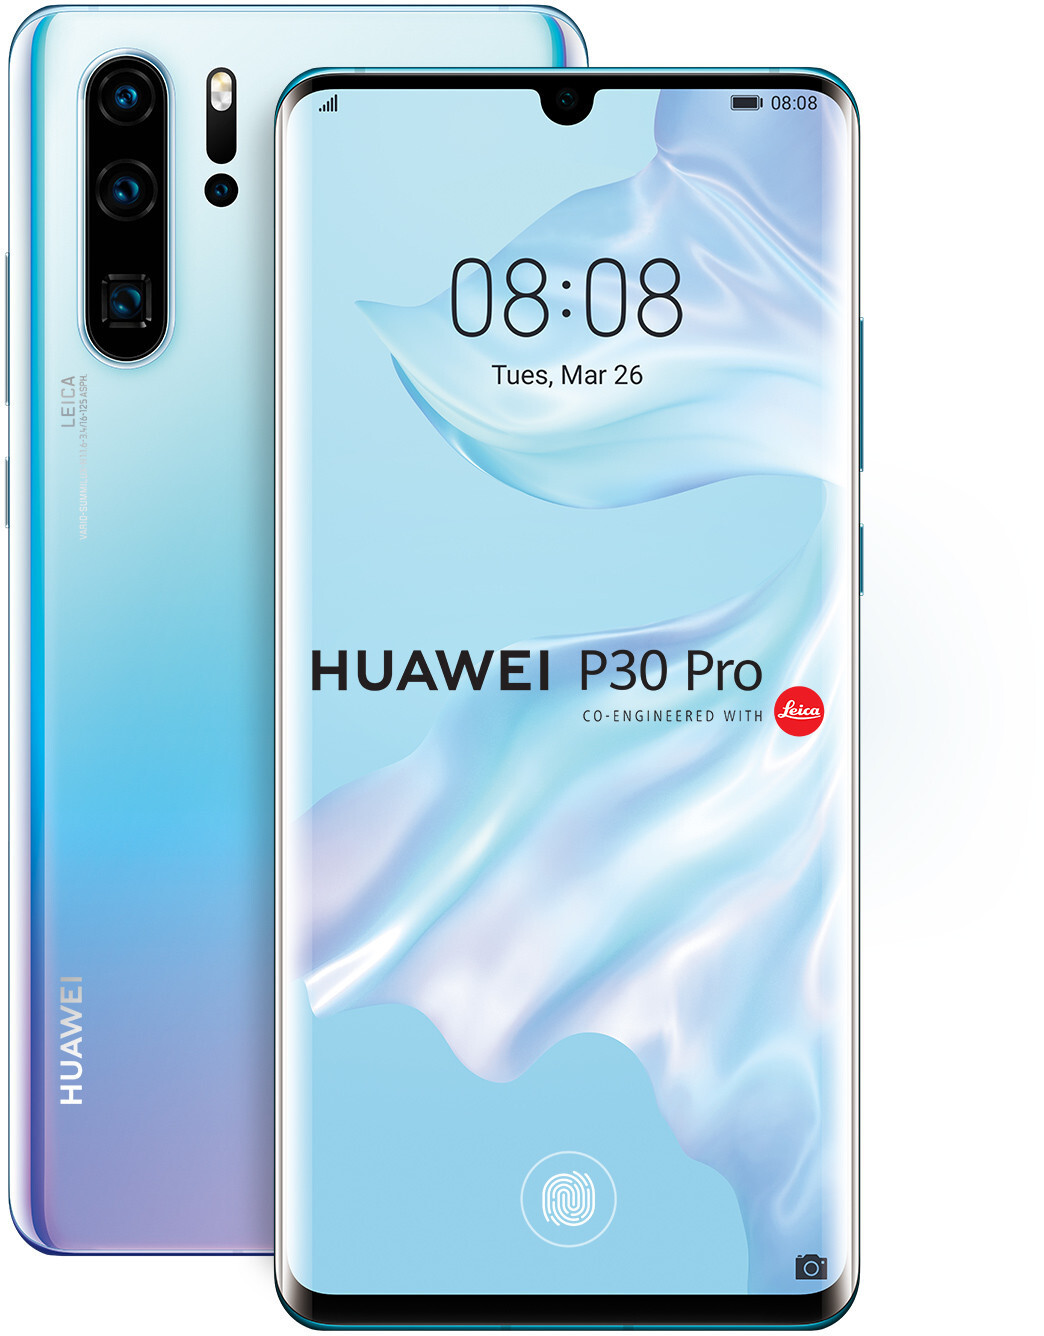 Huawei P20 Pro VS Huawei P30 Pro: Which One Is Better?